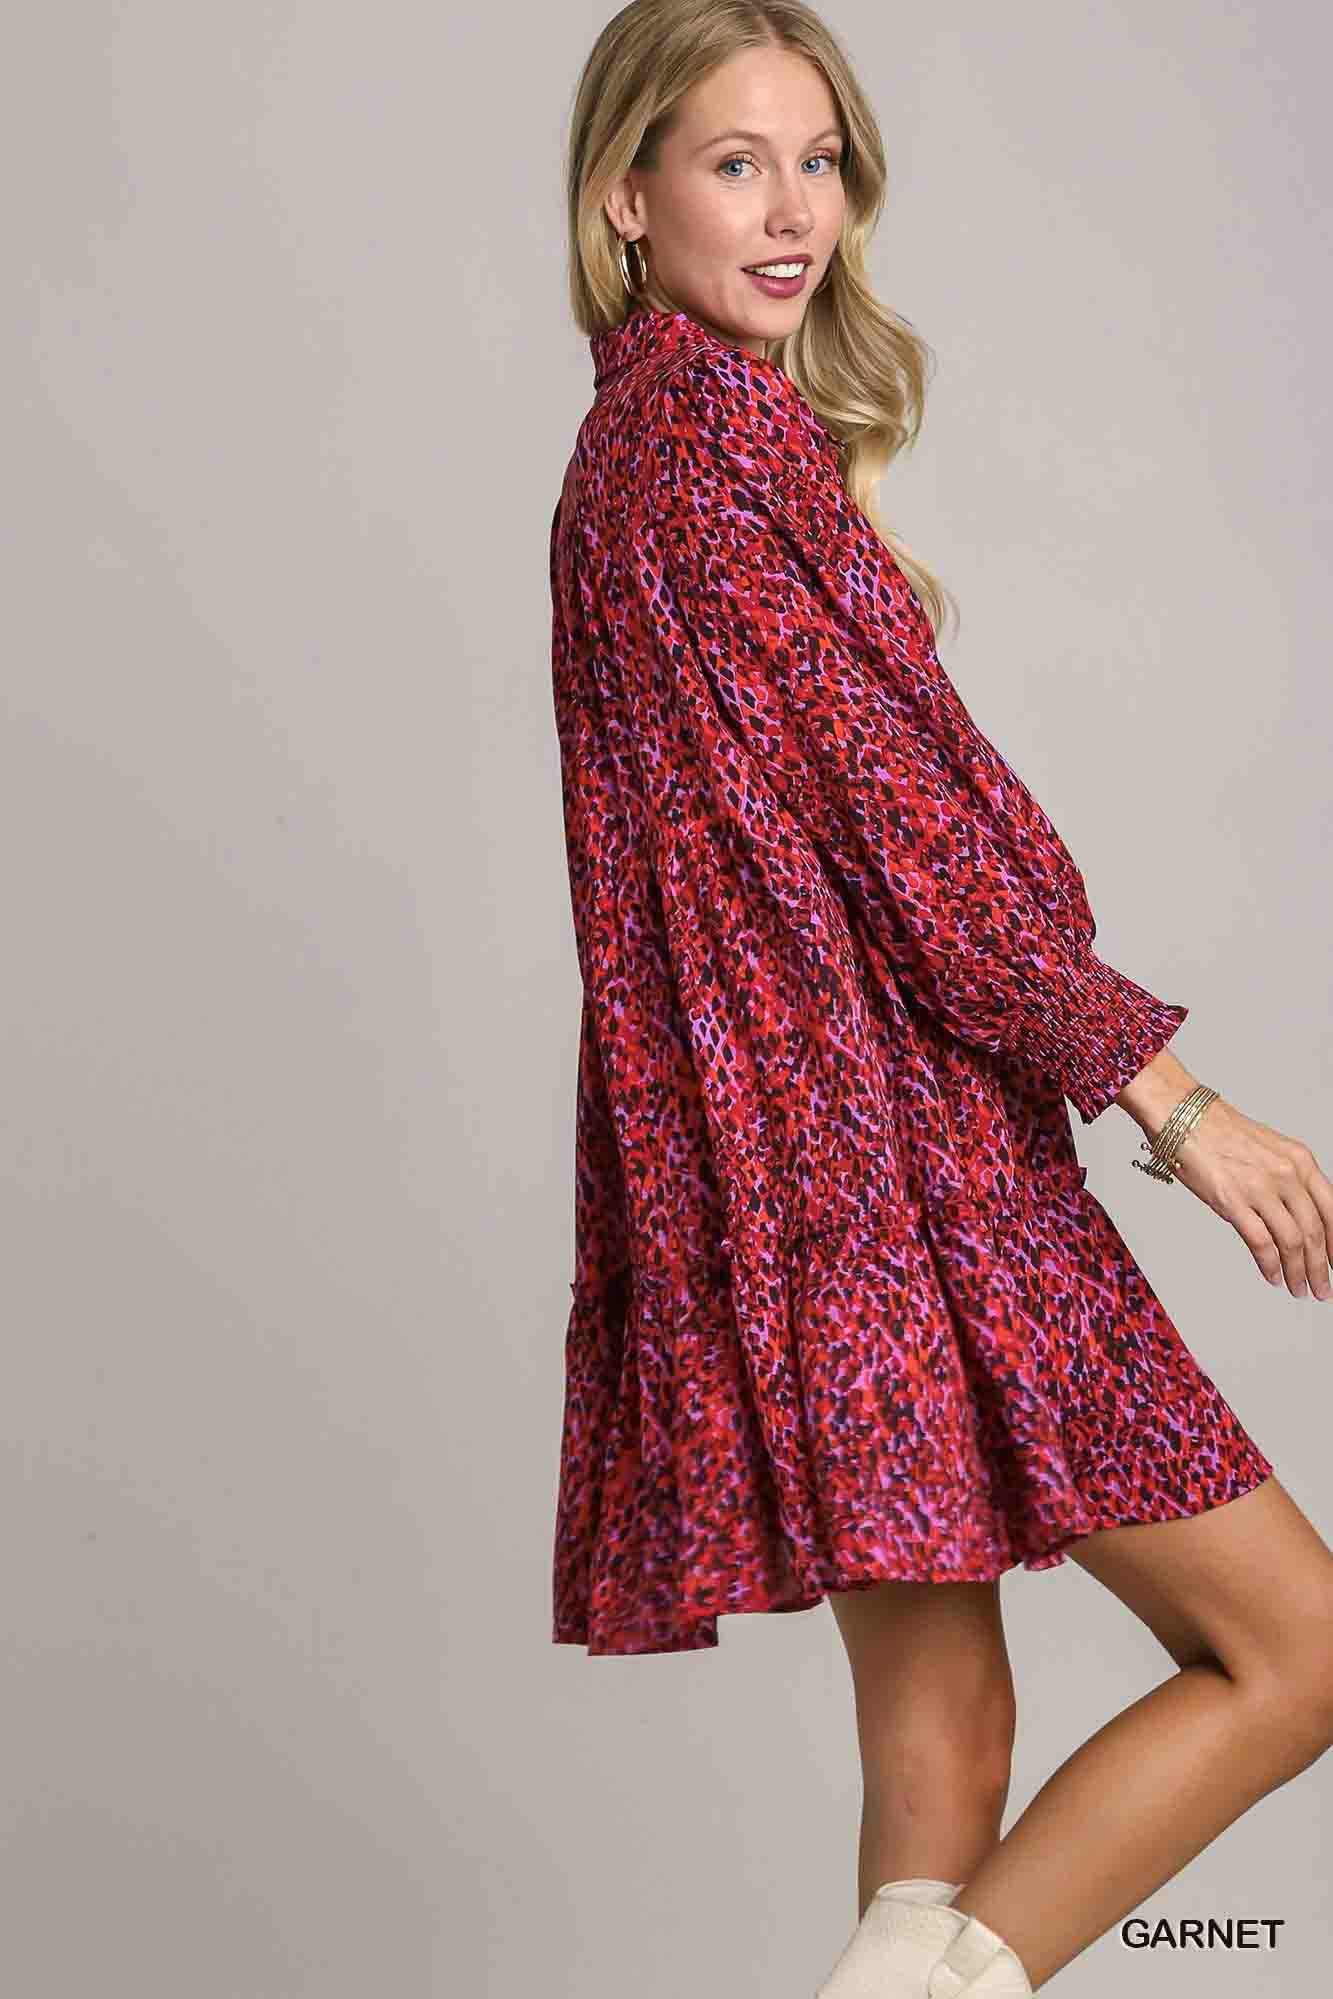 Mixed Print LSL Dress with Ruffle Trim in Garnet by Umgee